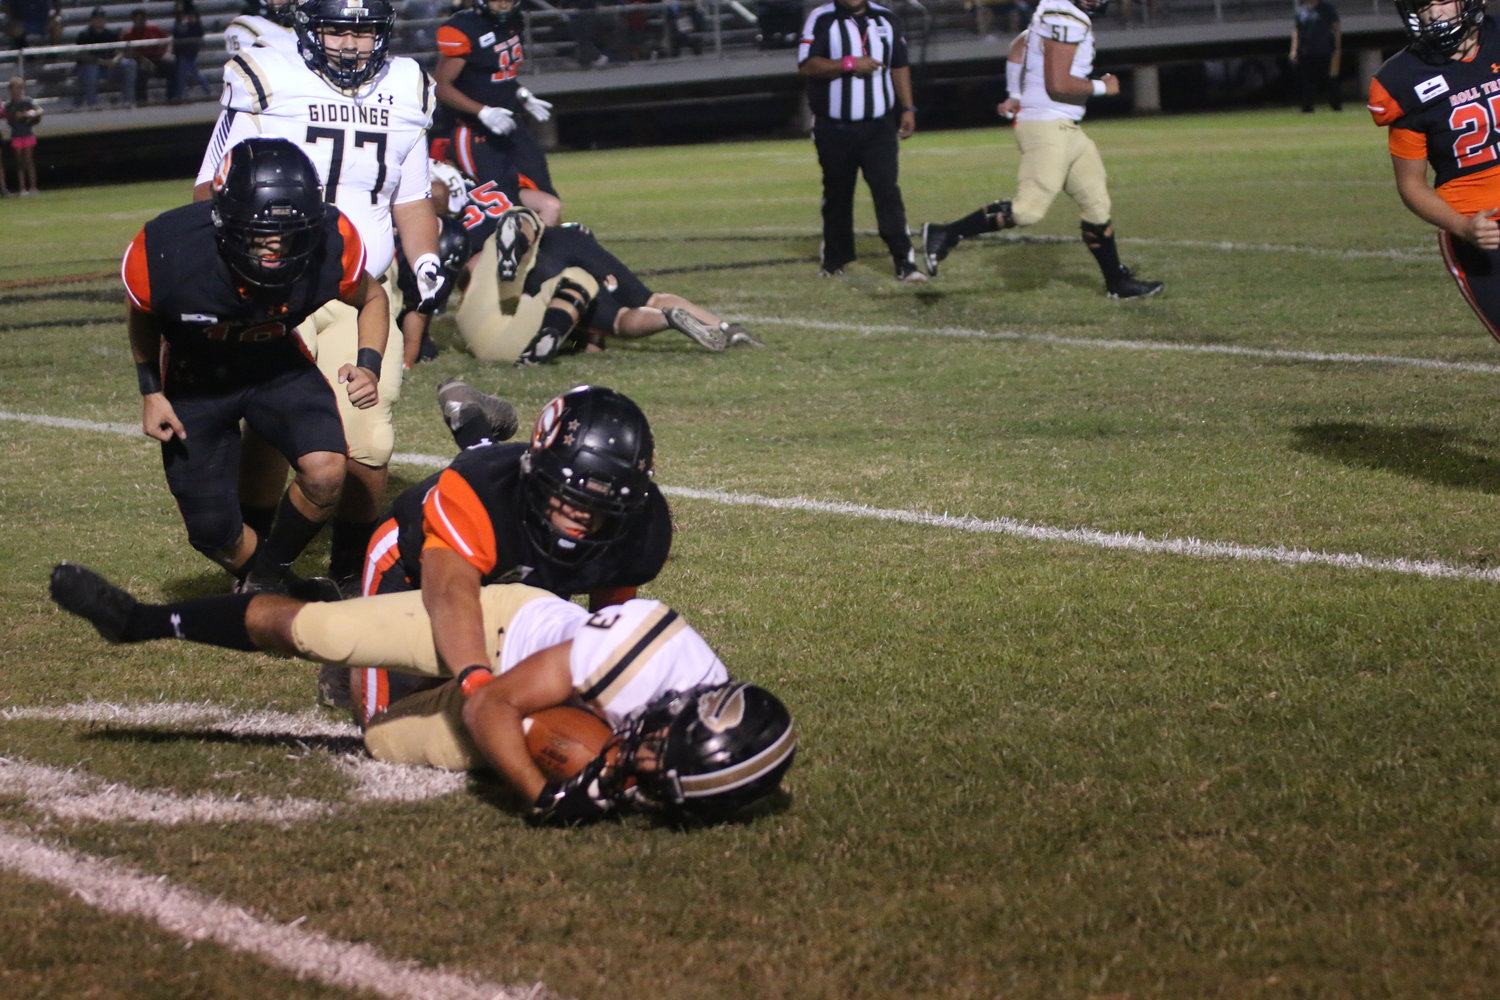 Blake Wright and T.J. Riojas combine to bring down a Giddings ballcarrier.